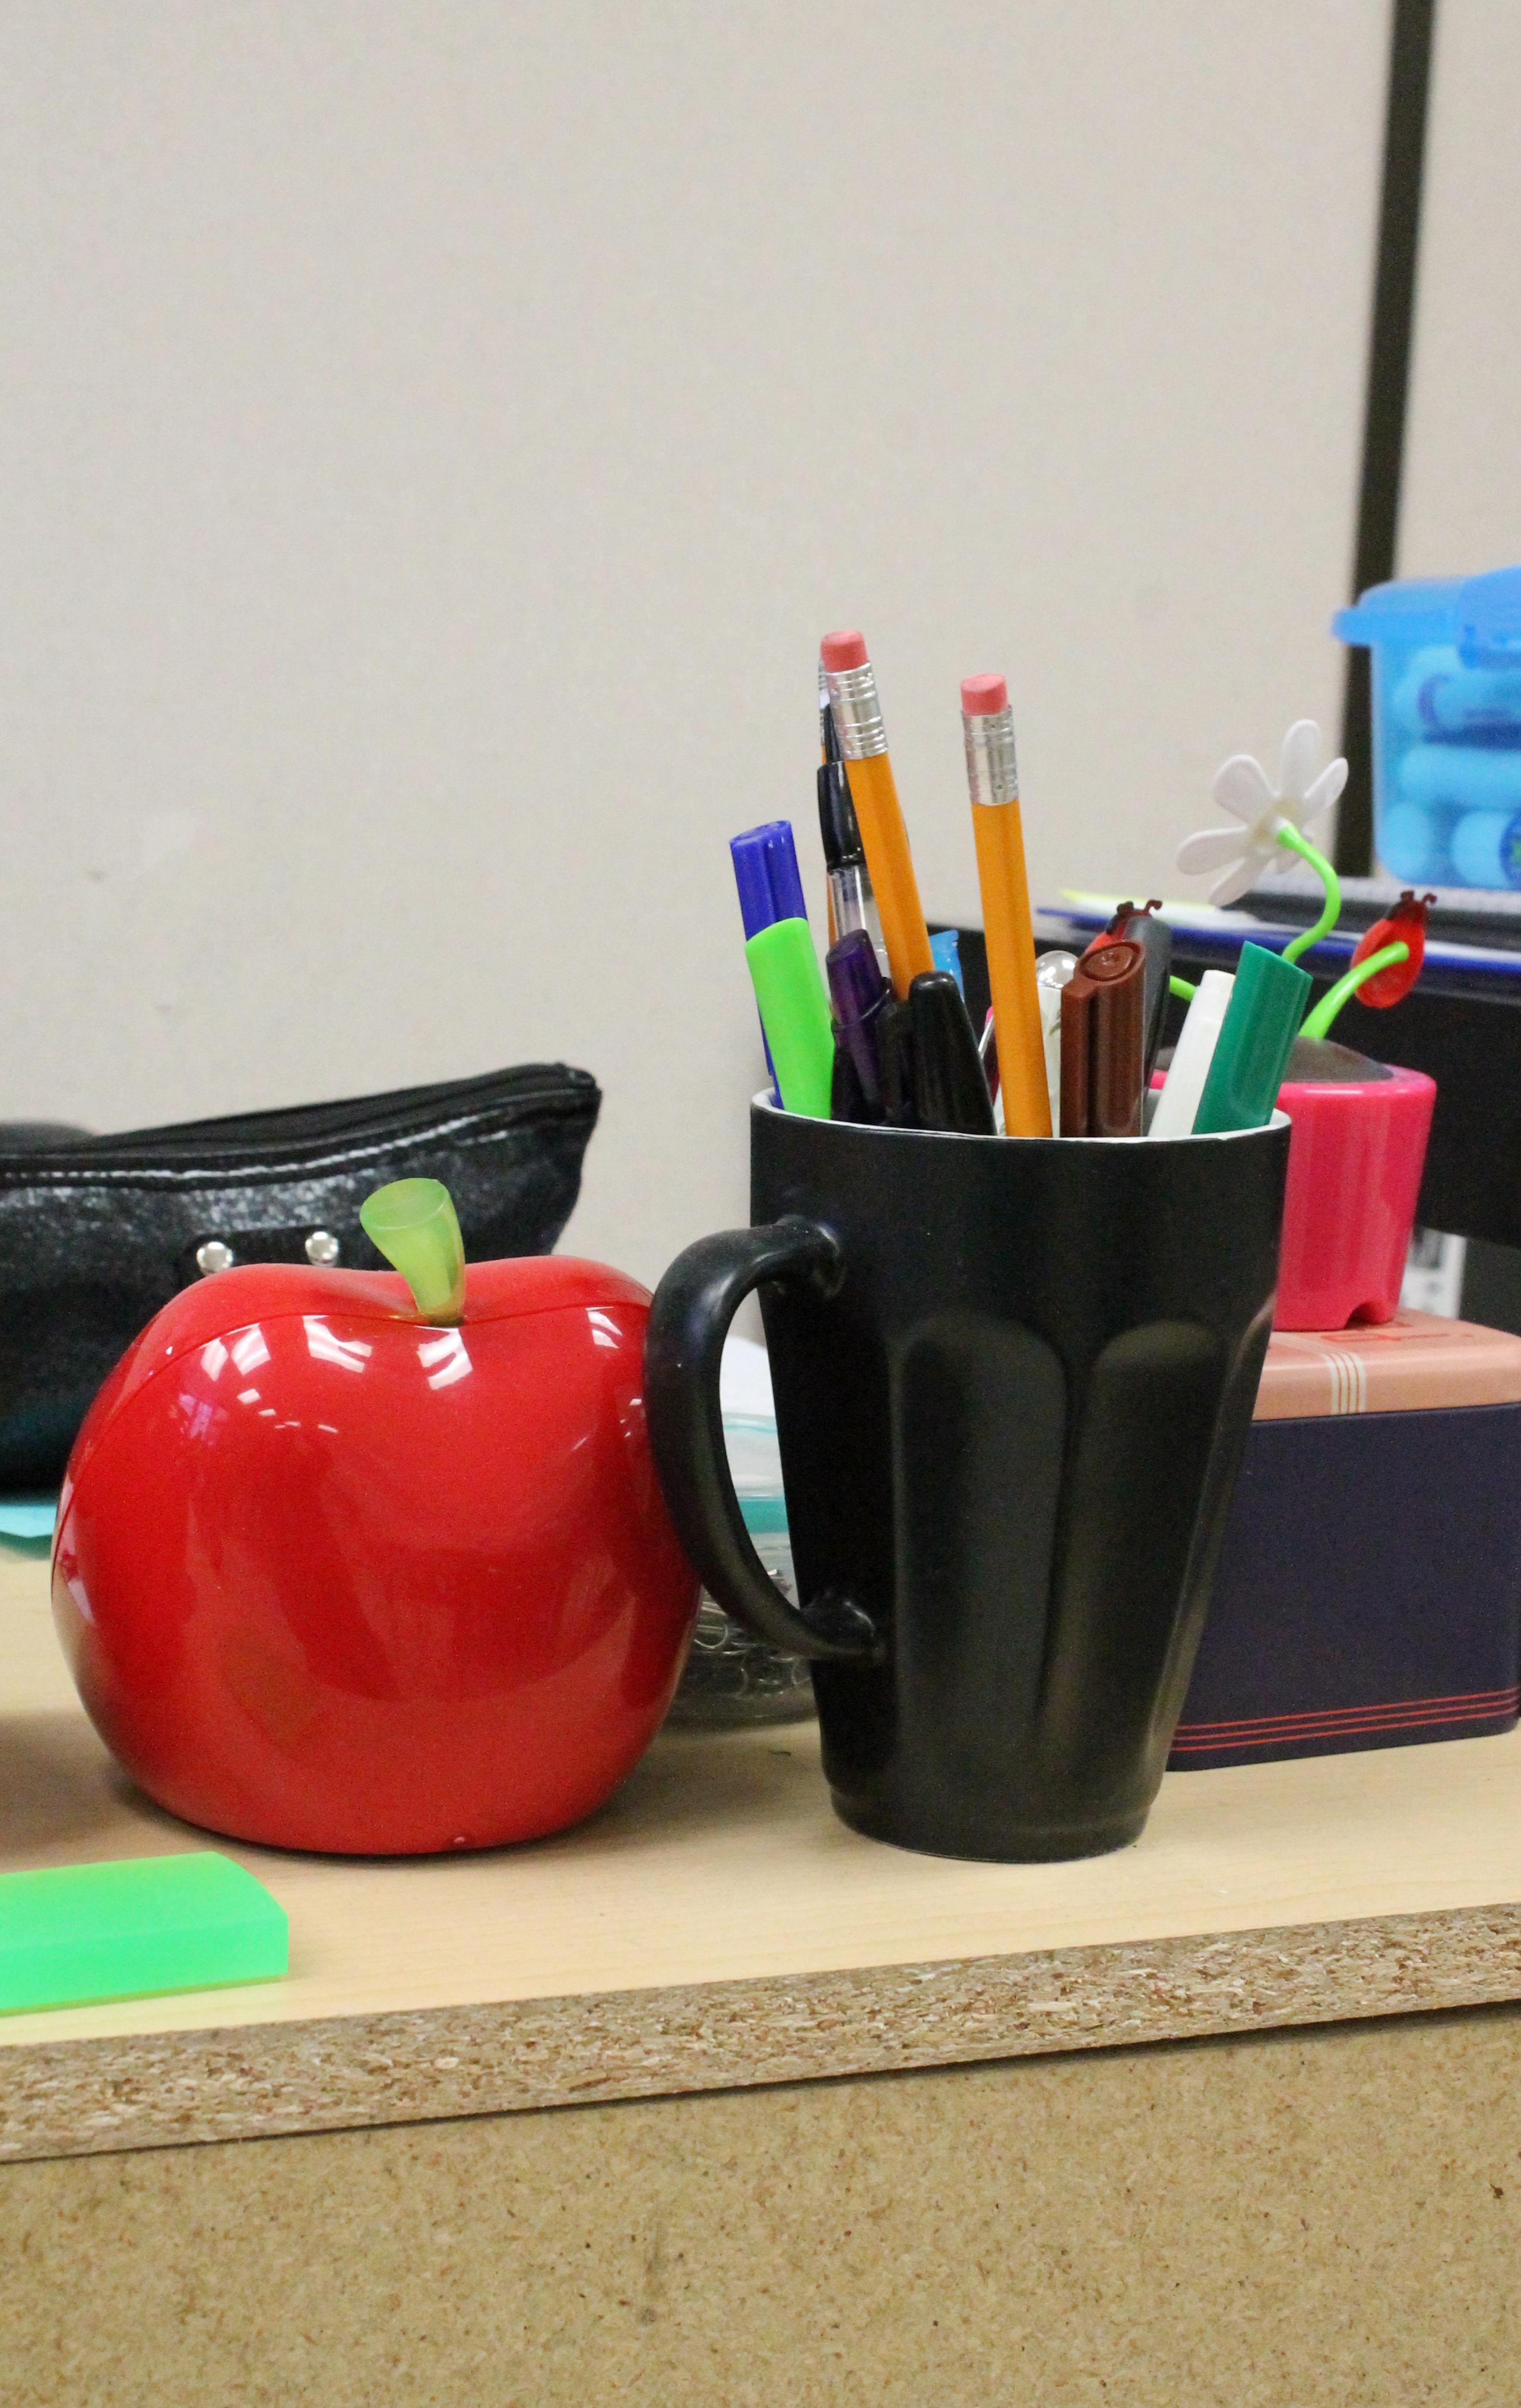 An apple and a mug of pens and pencils sits on a desk